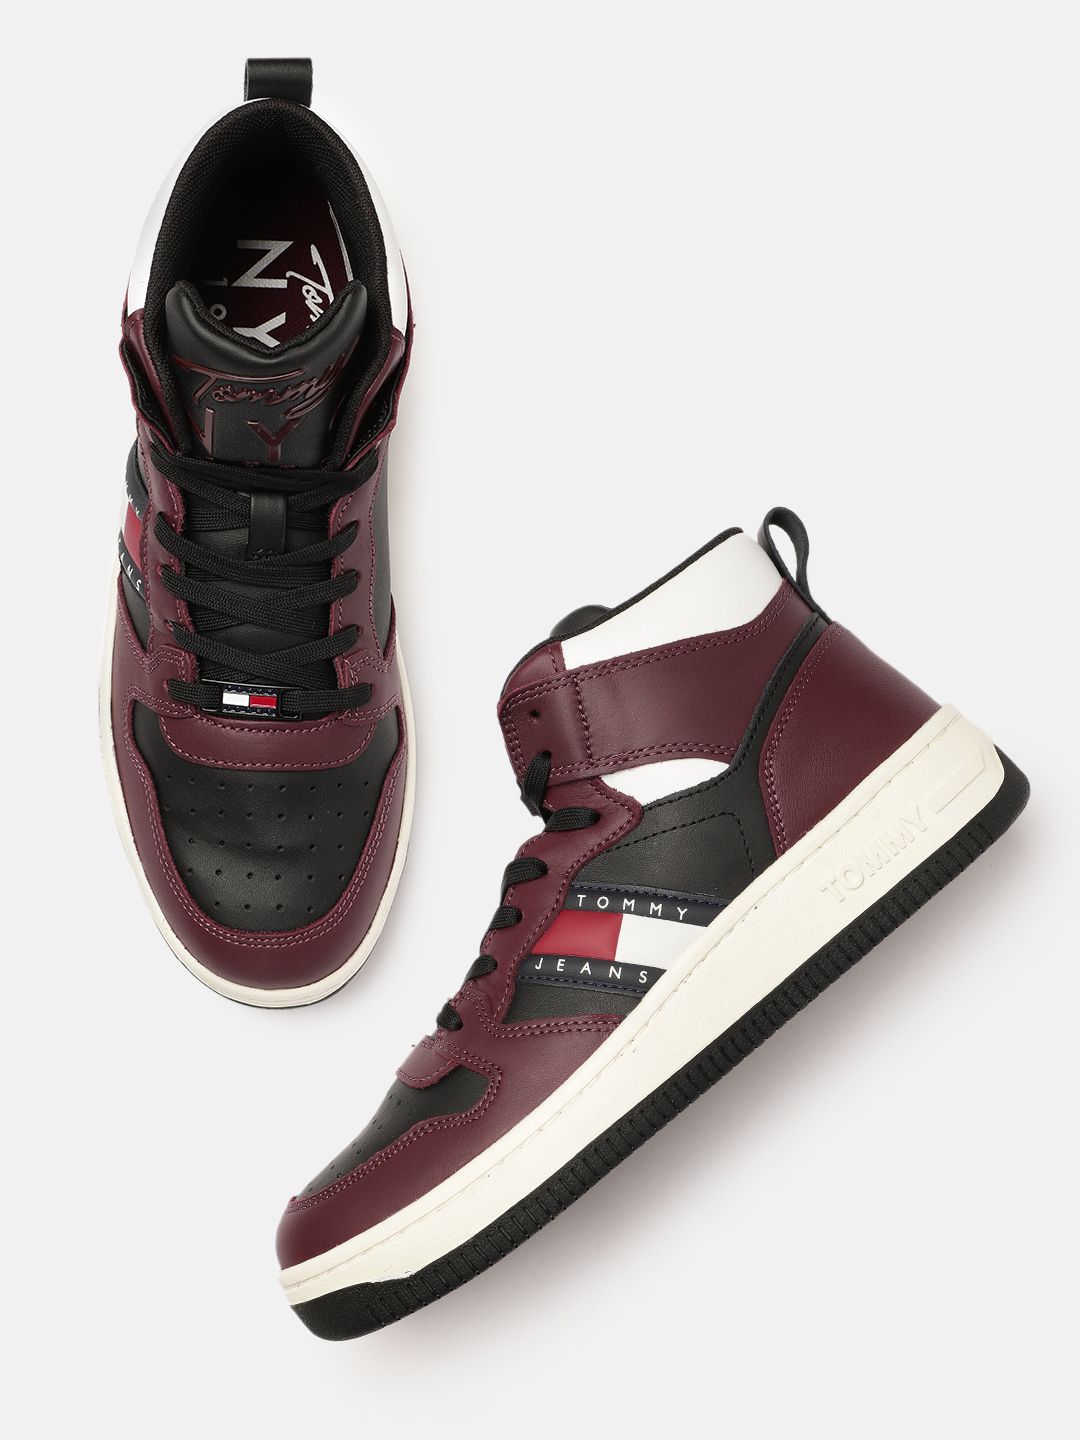 Tommy Hilfiger Women Burgundy & Black Perforated Leather Sneakers Price in India